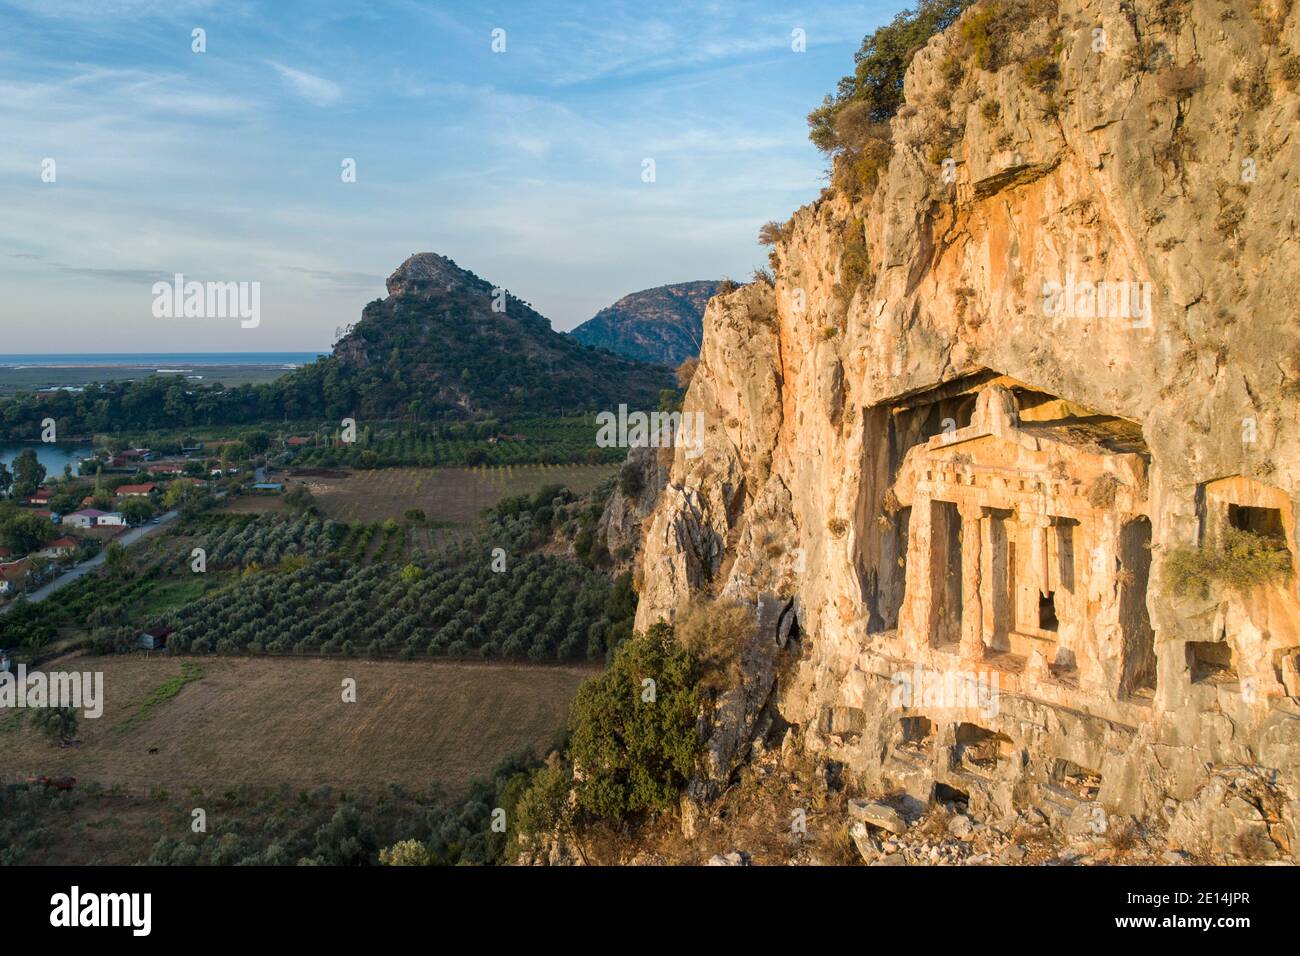 Aerial view of sunrise on an ancient Lycian rock tomb near the town of Dalyan, Muğla province, Turkey Stock Photo